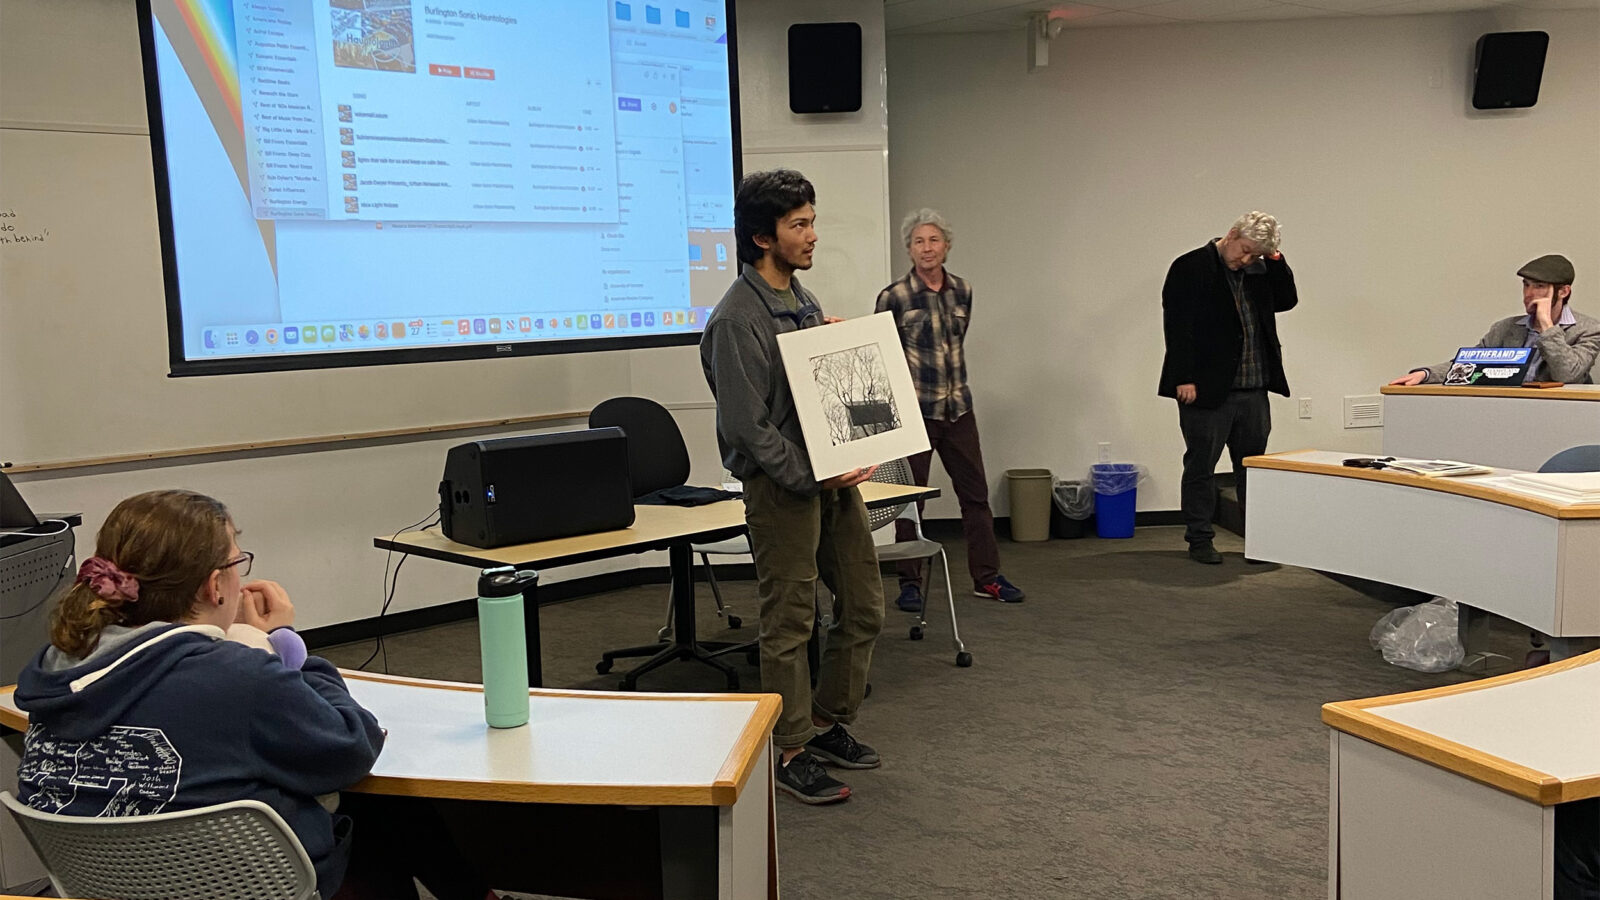 Student presenting a photograph to the class